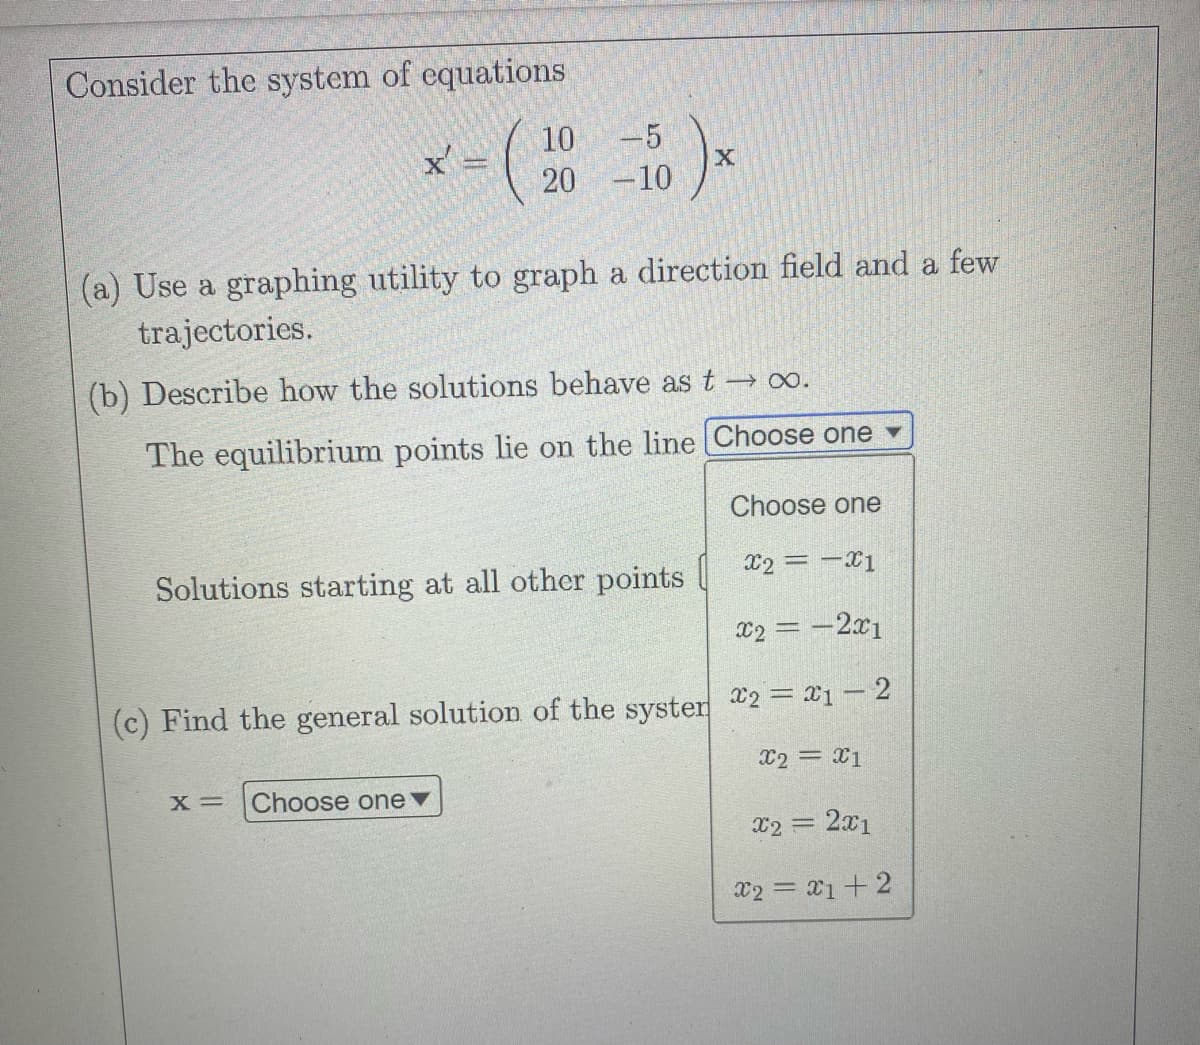 Consider the system of equations
10
(20
x'
1)x
X
-5
20 -10
(a) Use a graphing utility to graph a direction field and a few
trajectories.
(b) Describe how the solutions behave as t → ∞.
The equilibrium points lie on the line [Choose one ▾
Solutions starting at all other points
X= Choose one ▼
(c) Find the general solution of the syster
Choose one
x2 = -X1
x2 = -2x1
x2 = x1-2
X2 = x1
= 2x1
x2 = 1 + 2
x2 =